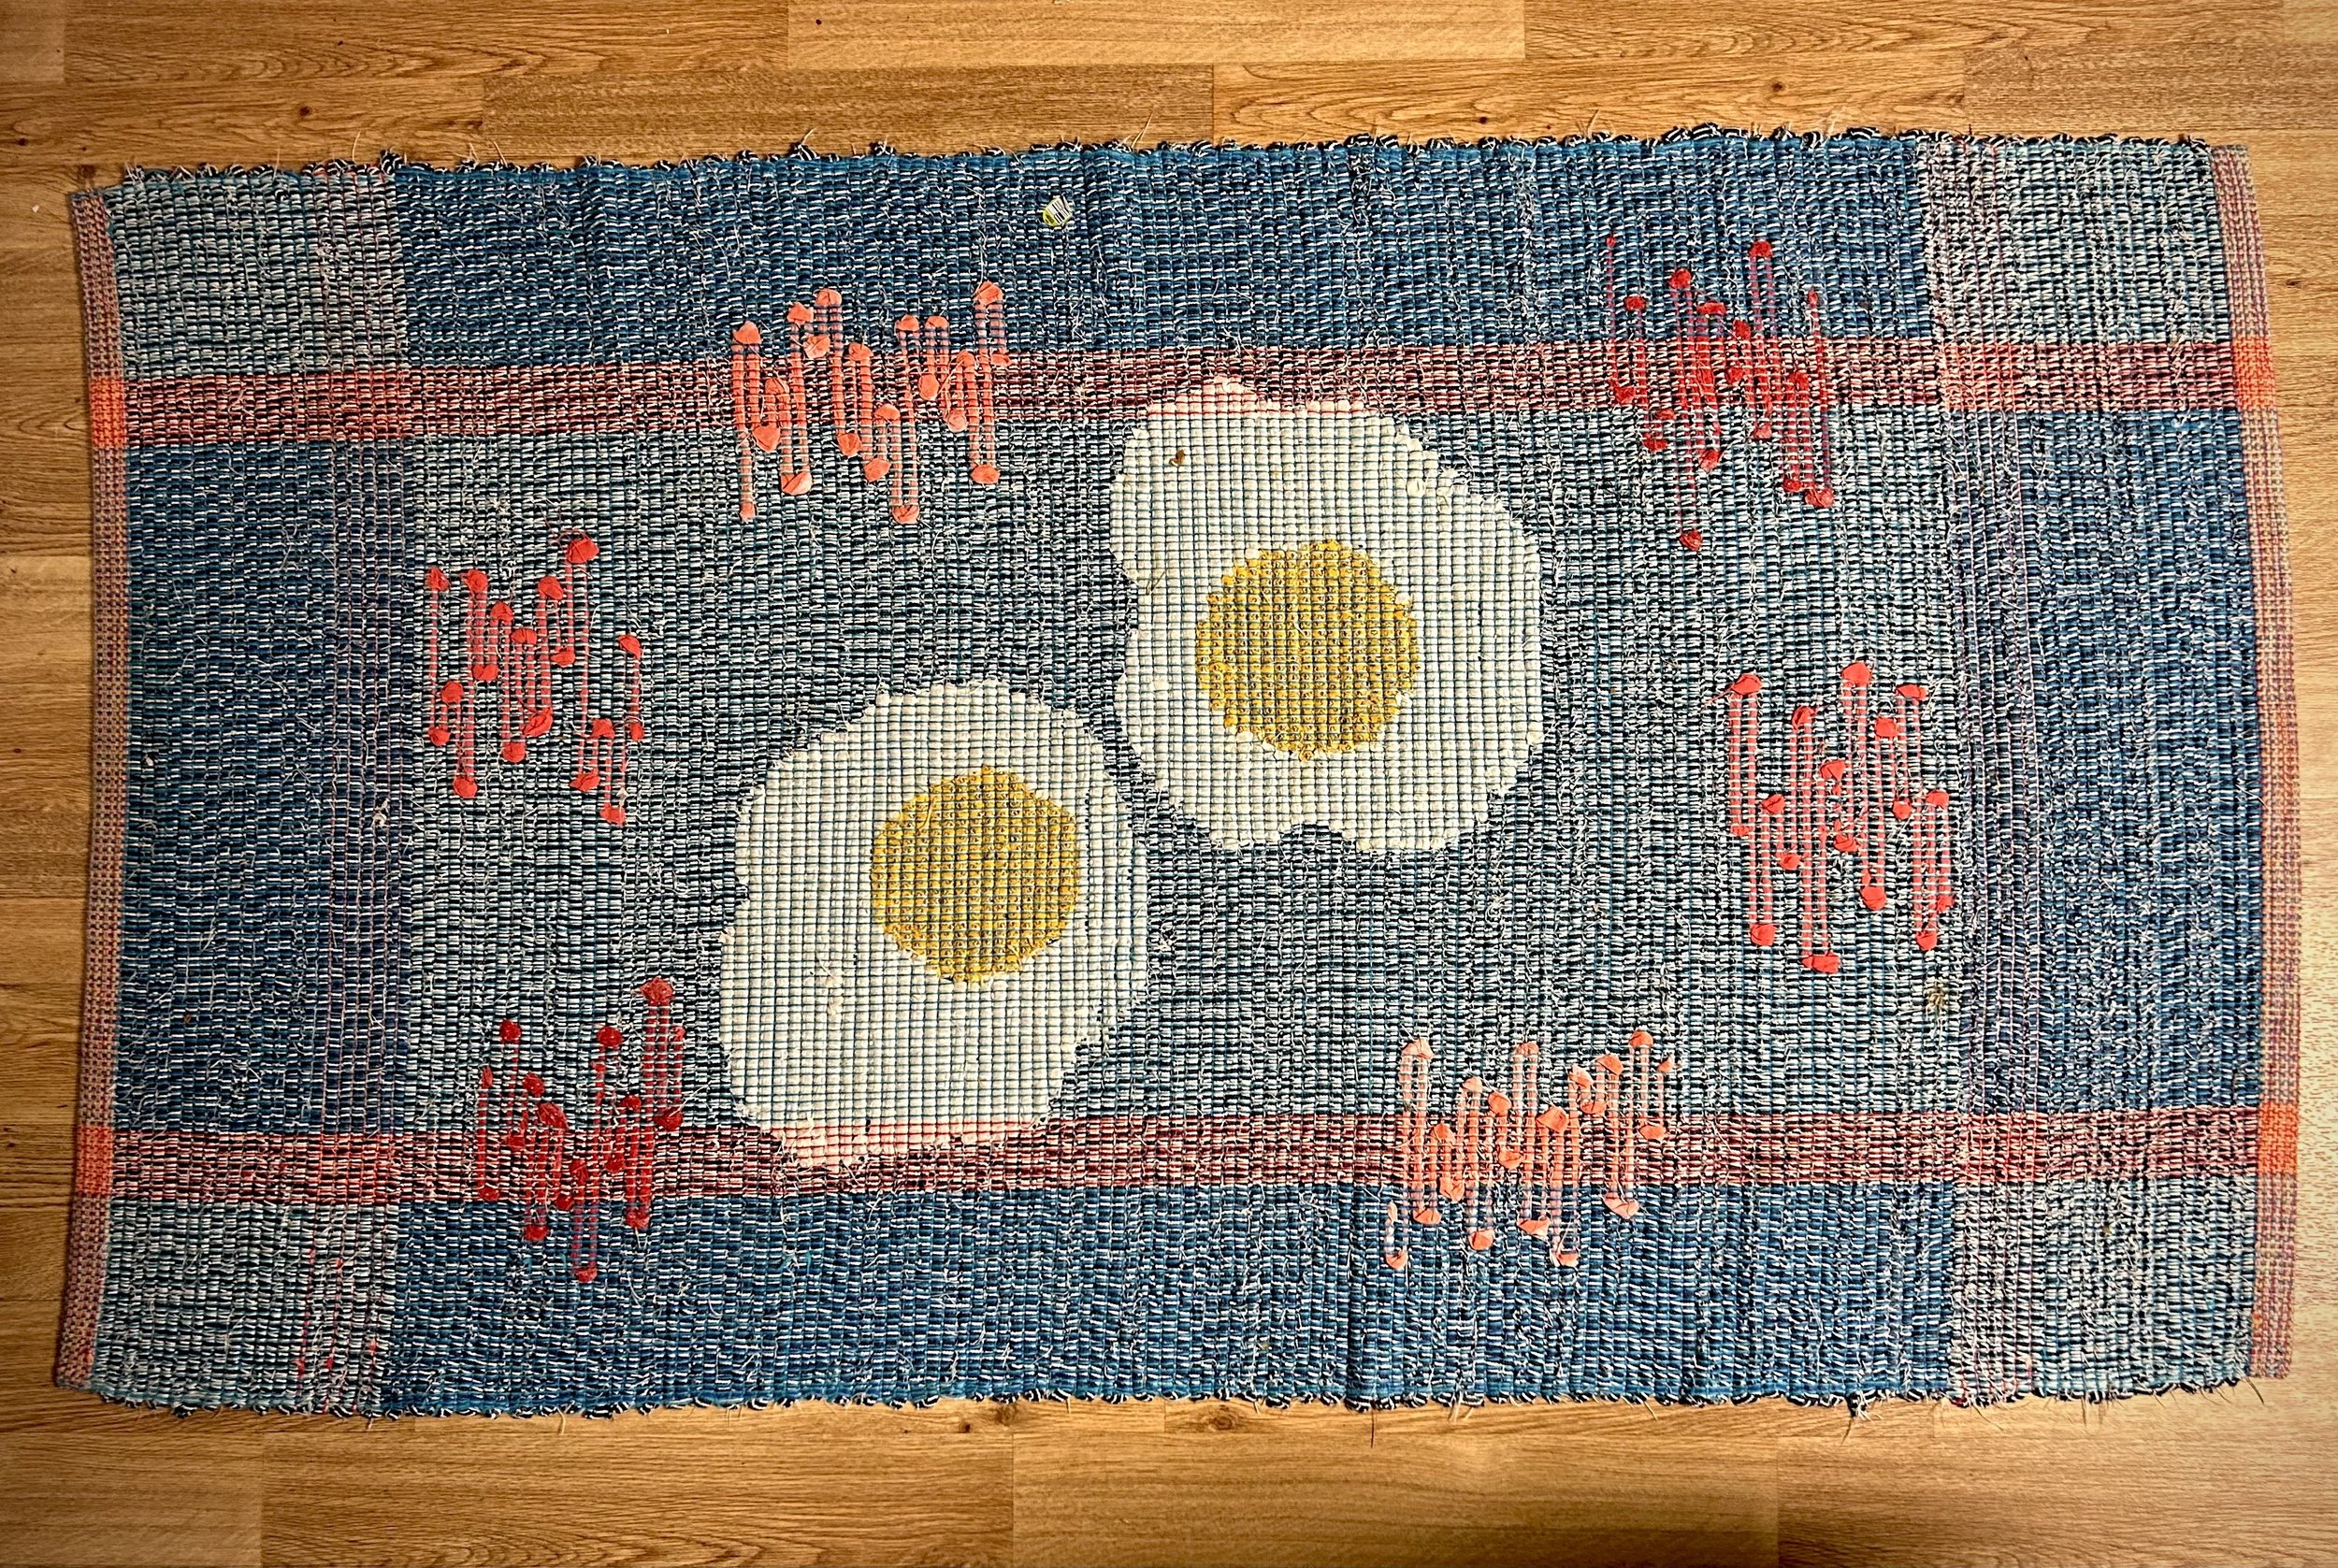   Egg Rug,  2020. Cotton carpet warp, cotton rag weft. Woven with Log Cabin and inlay rag rug techniques. 